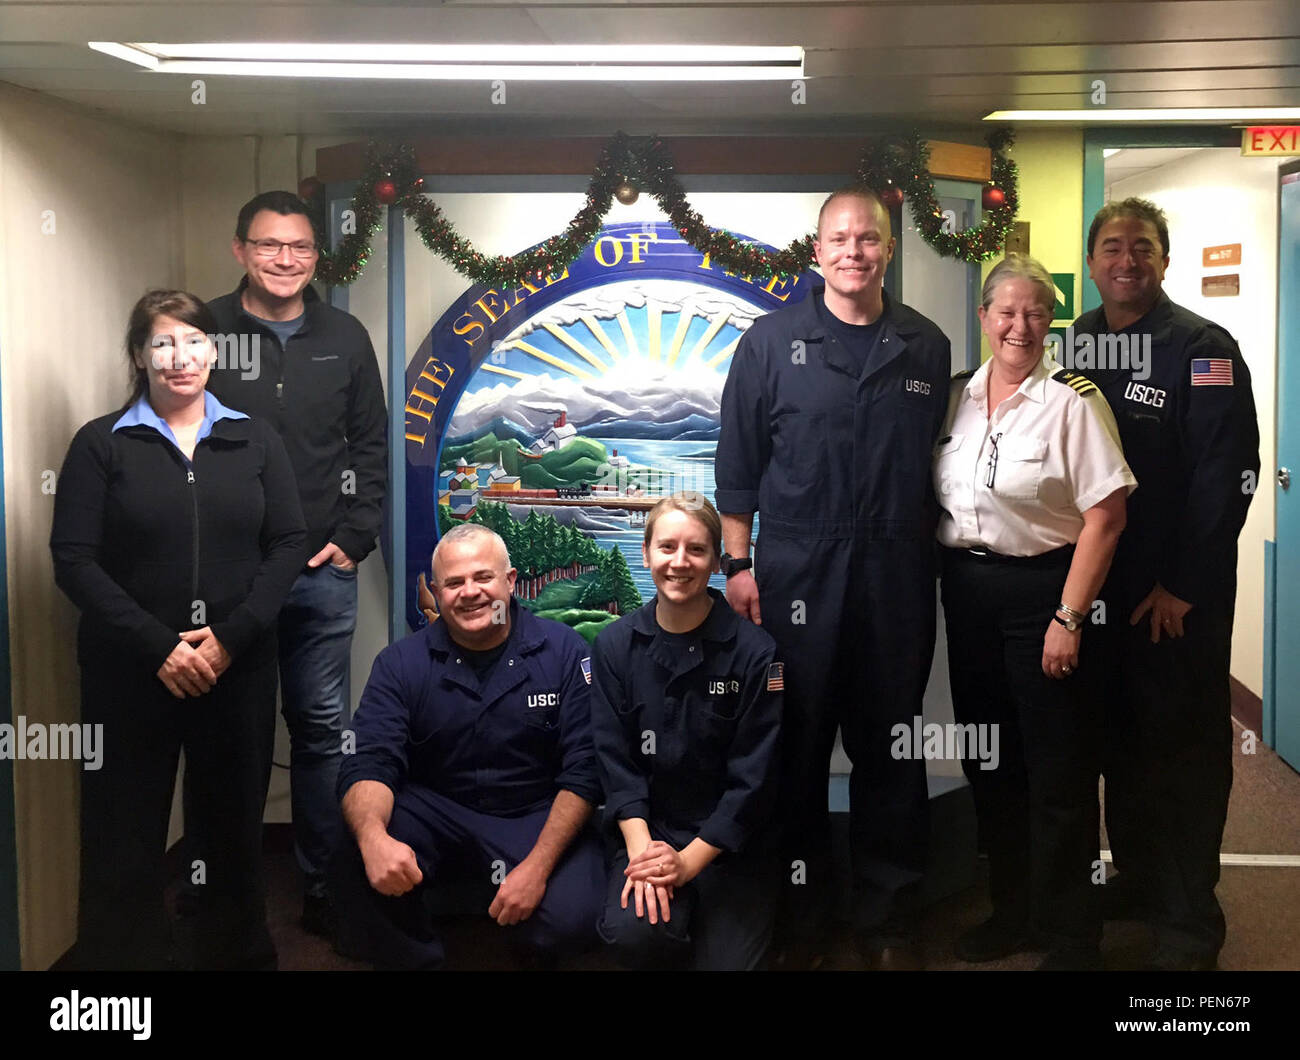 Lt. Ryan Butler, Lt. j.g. Katharine Martorelli, Chief Warrant Officer Israel Nieves and Chief Warrant Officer Martin Donohue from Sector Juneau, Alaska, along with vessel Master Captain Josh McGrath and two other crewmembers, pose for a photo during a ship ride event Dec. 14, 2015.  The event marked the first mutual training agreement between the Coast Guard and Alaska Marine Highway System. (U.S. Coast Guard photo) Stock Photo